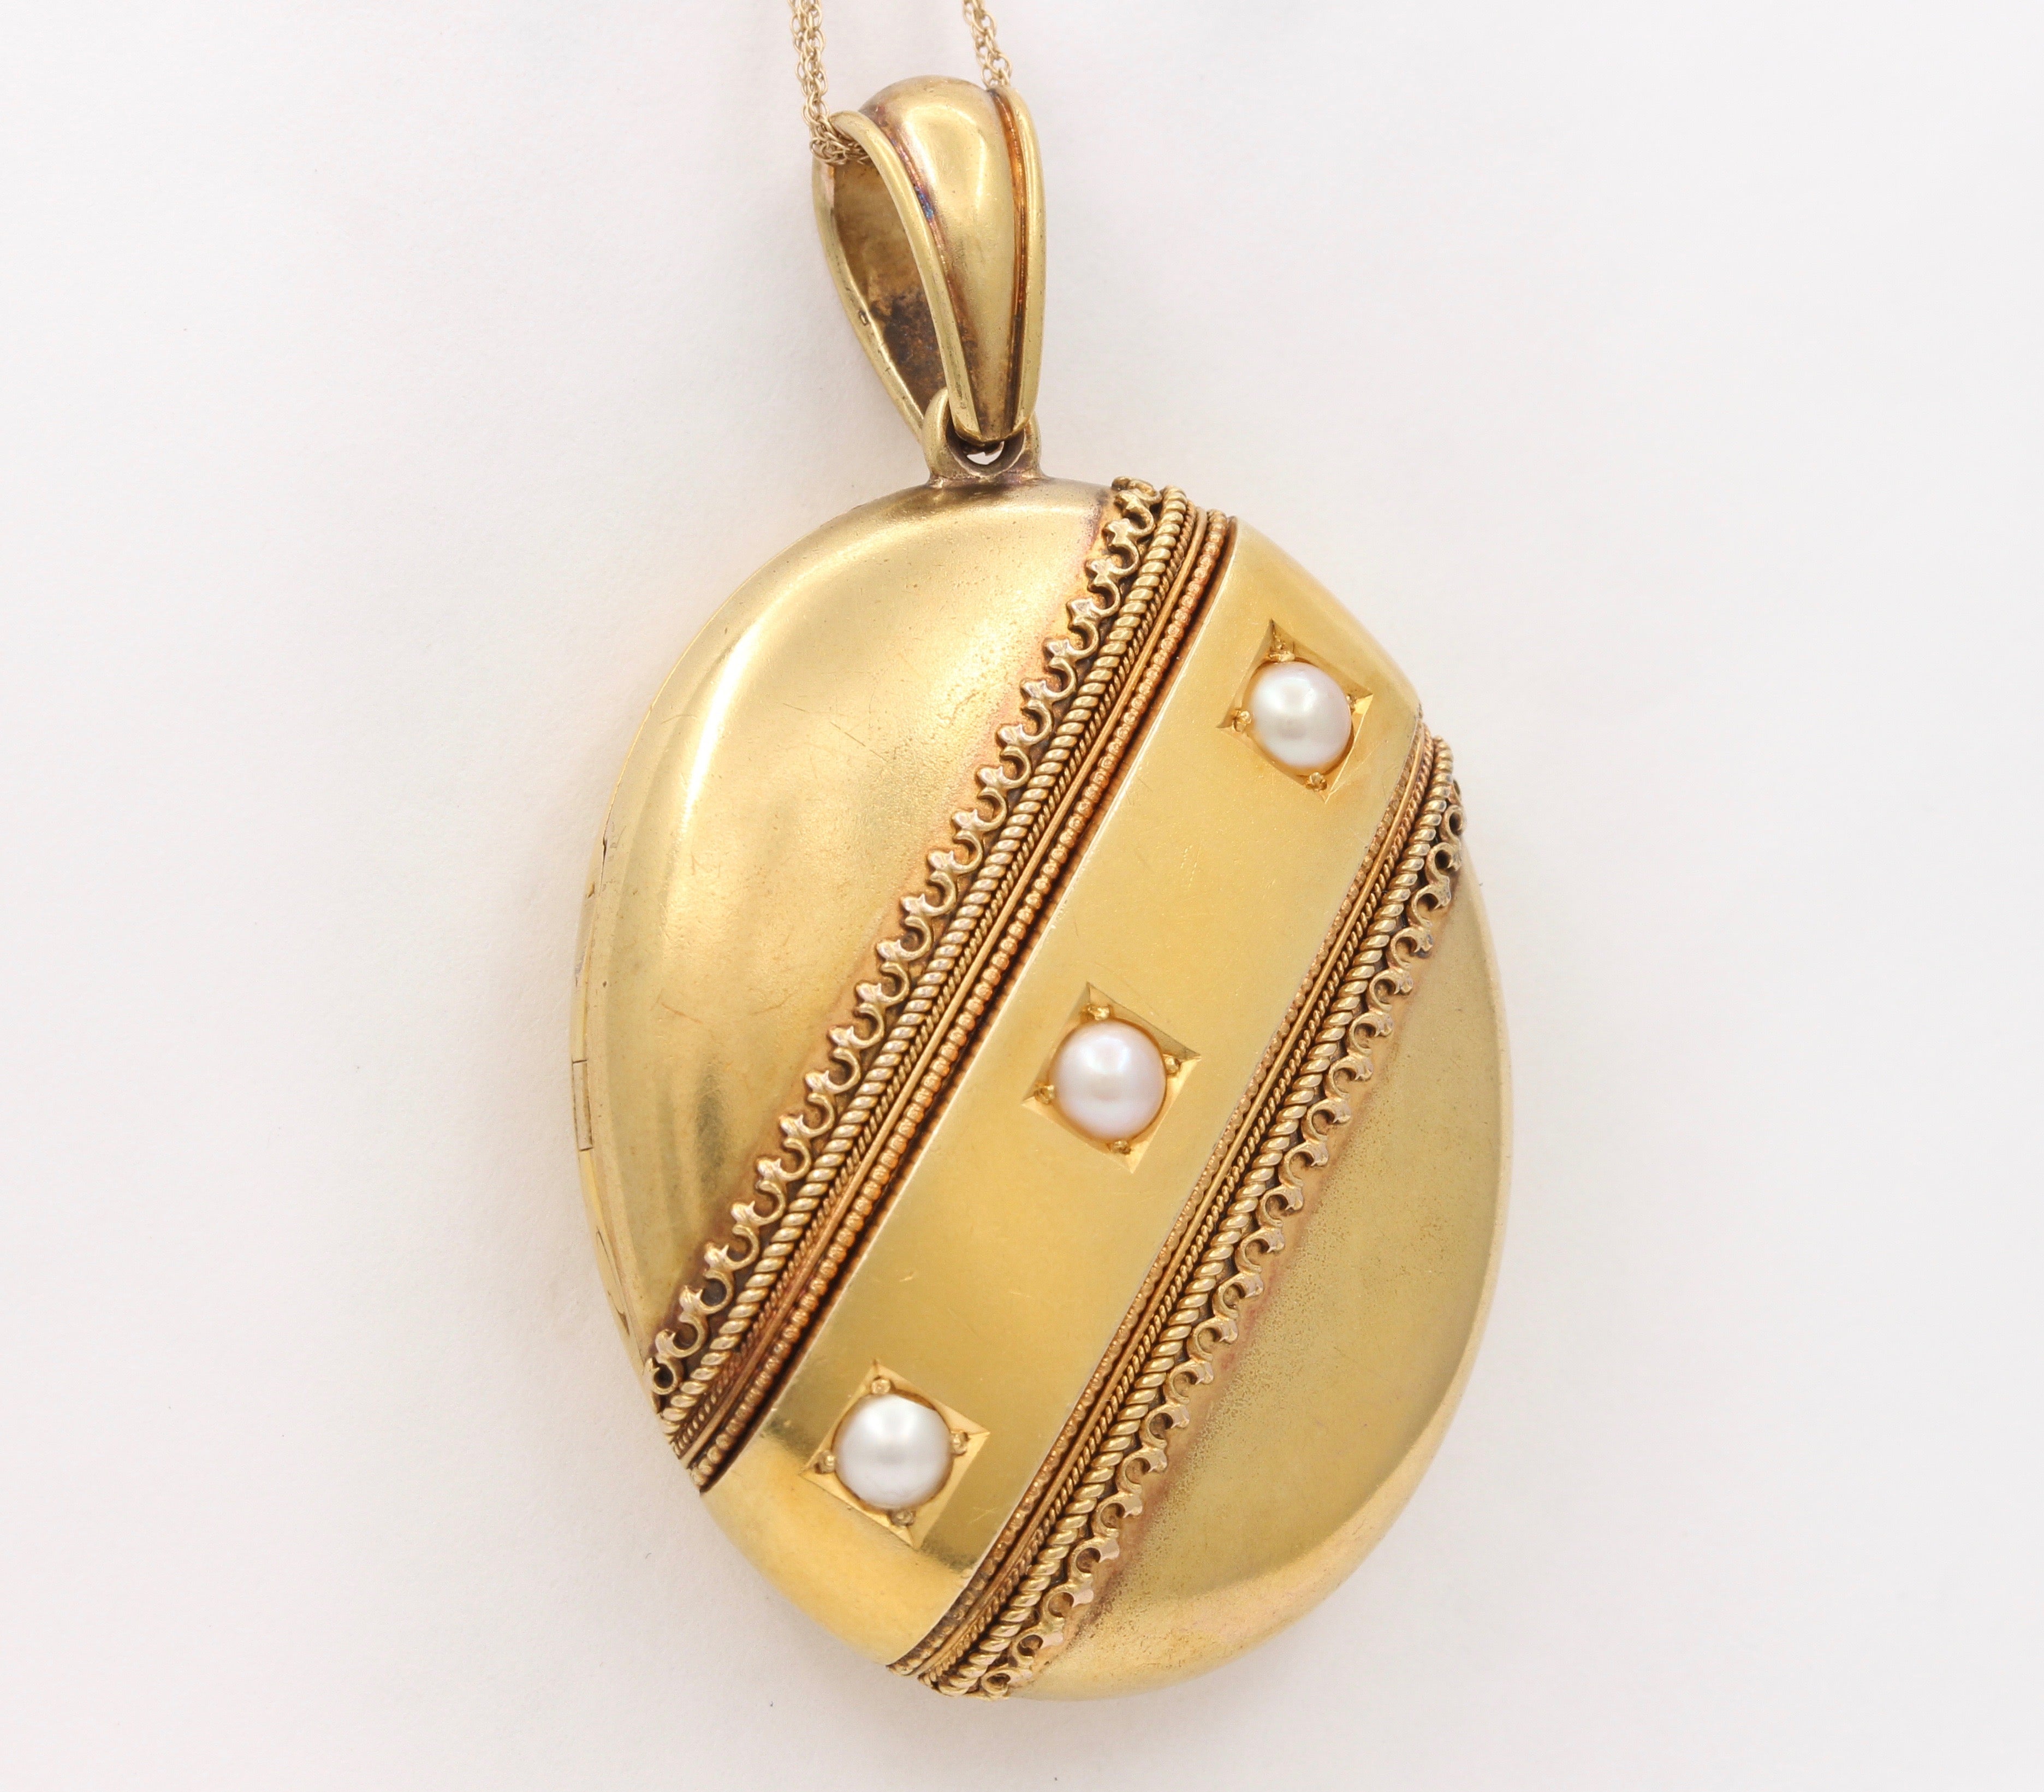 14k Gold Locket Pendant that holds picture, image, photograph inside double  photo keepsake jewelry. Base metal is sterling silver.